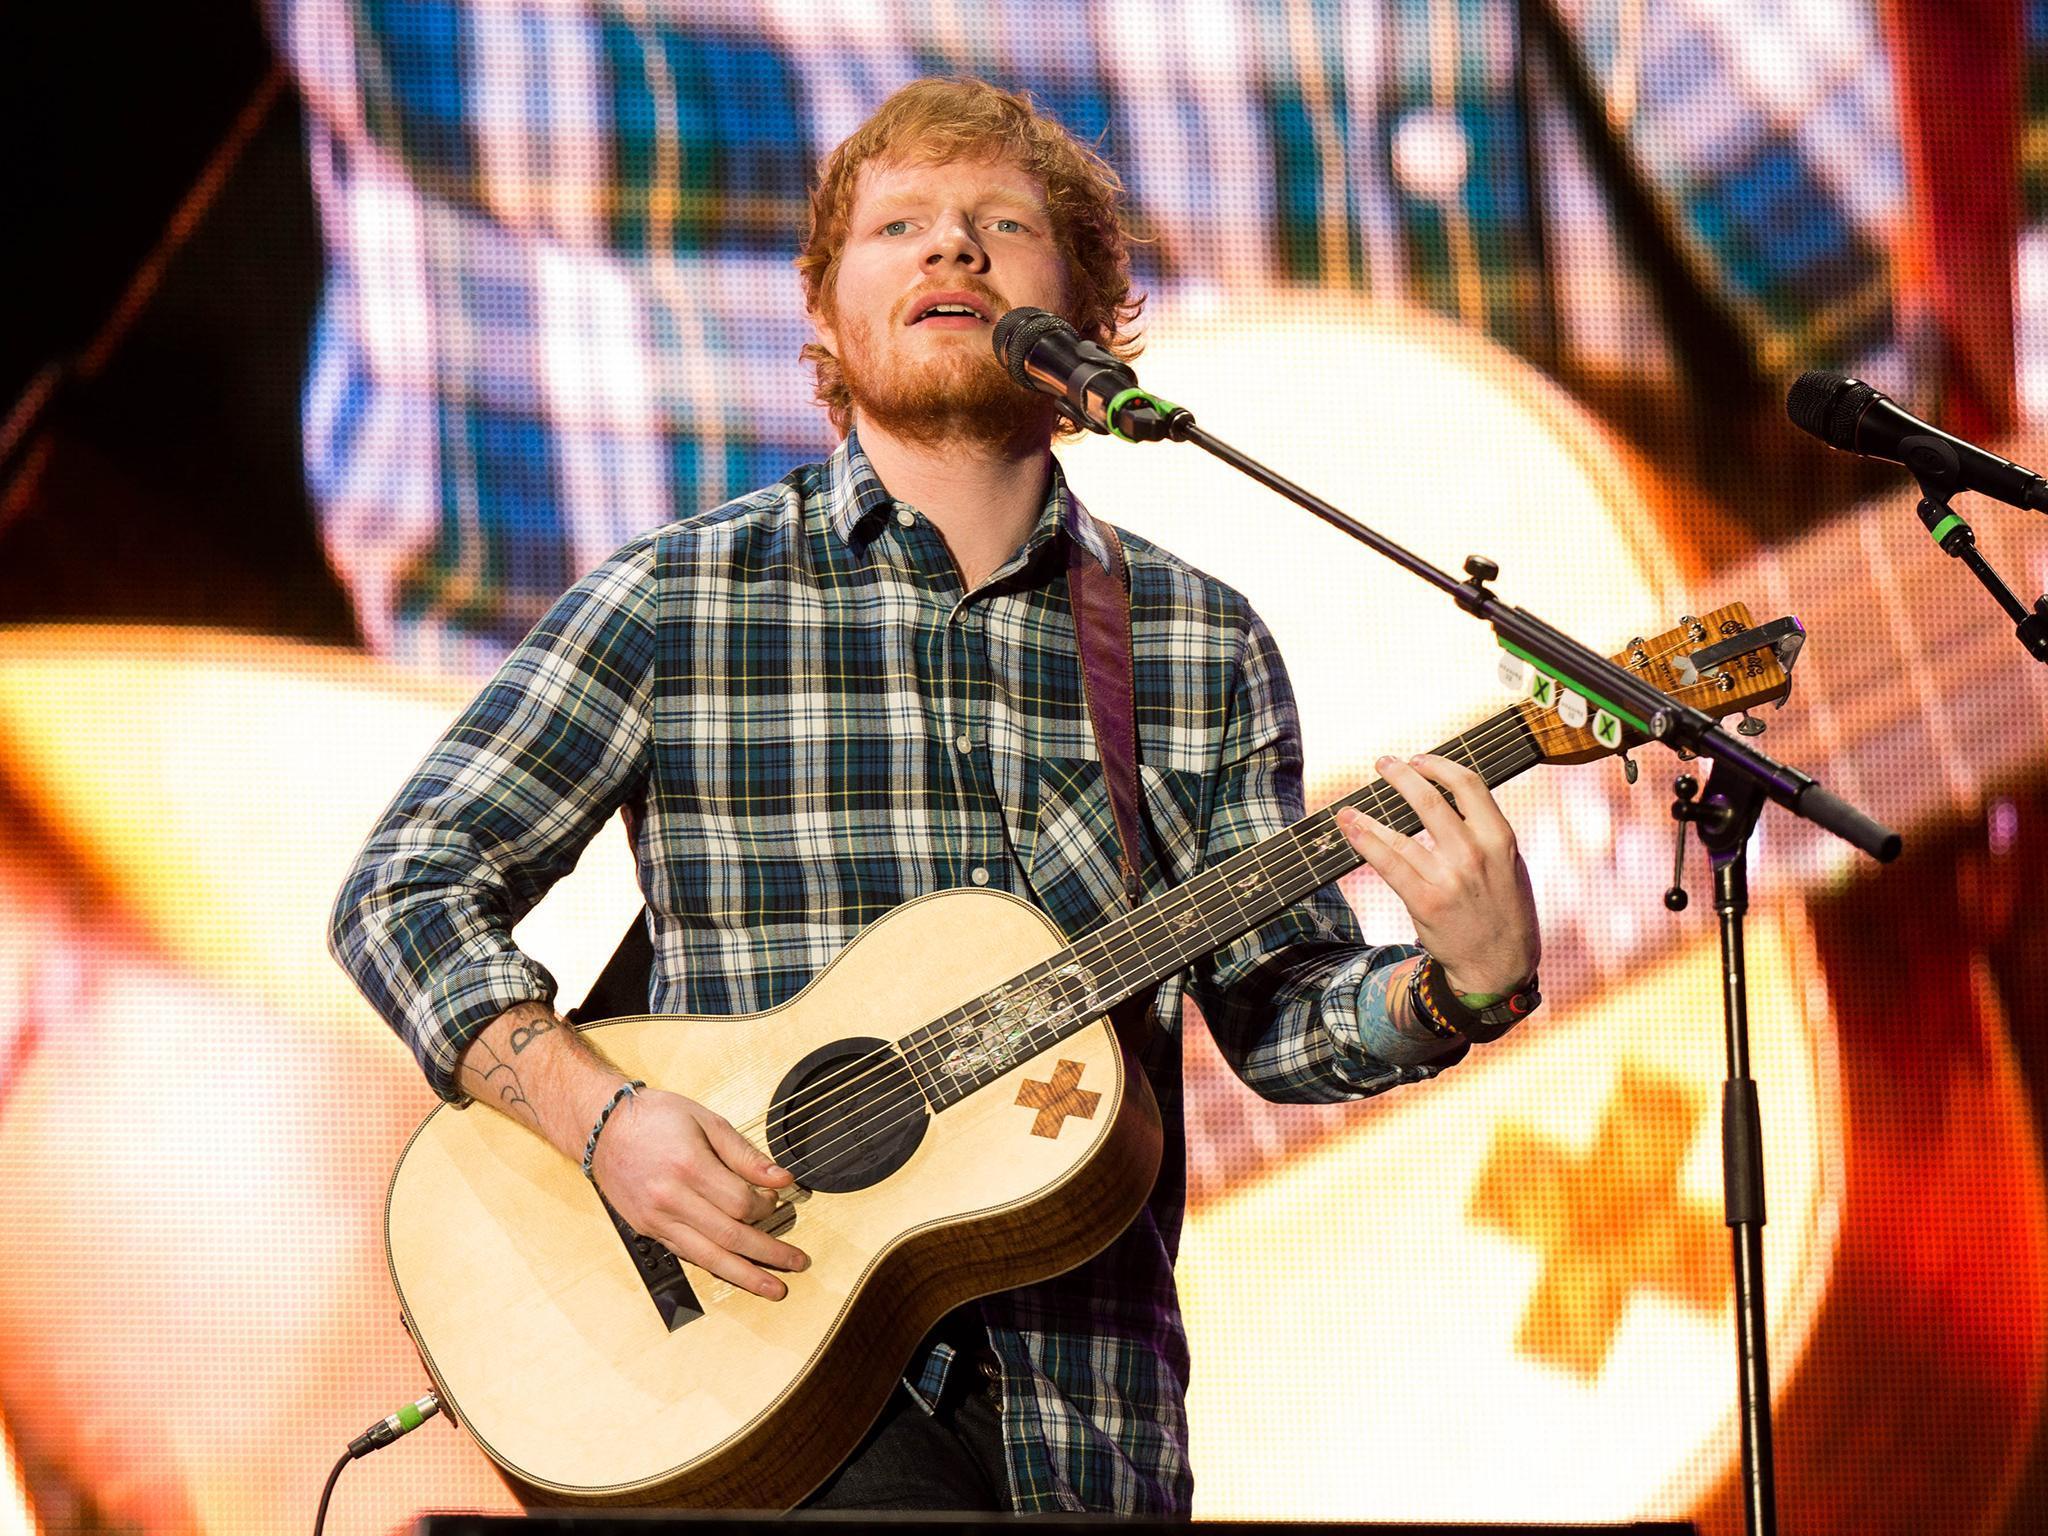 Even chart-topping artists like Ed Sheeran aren't immune to their songs dying